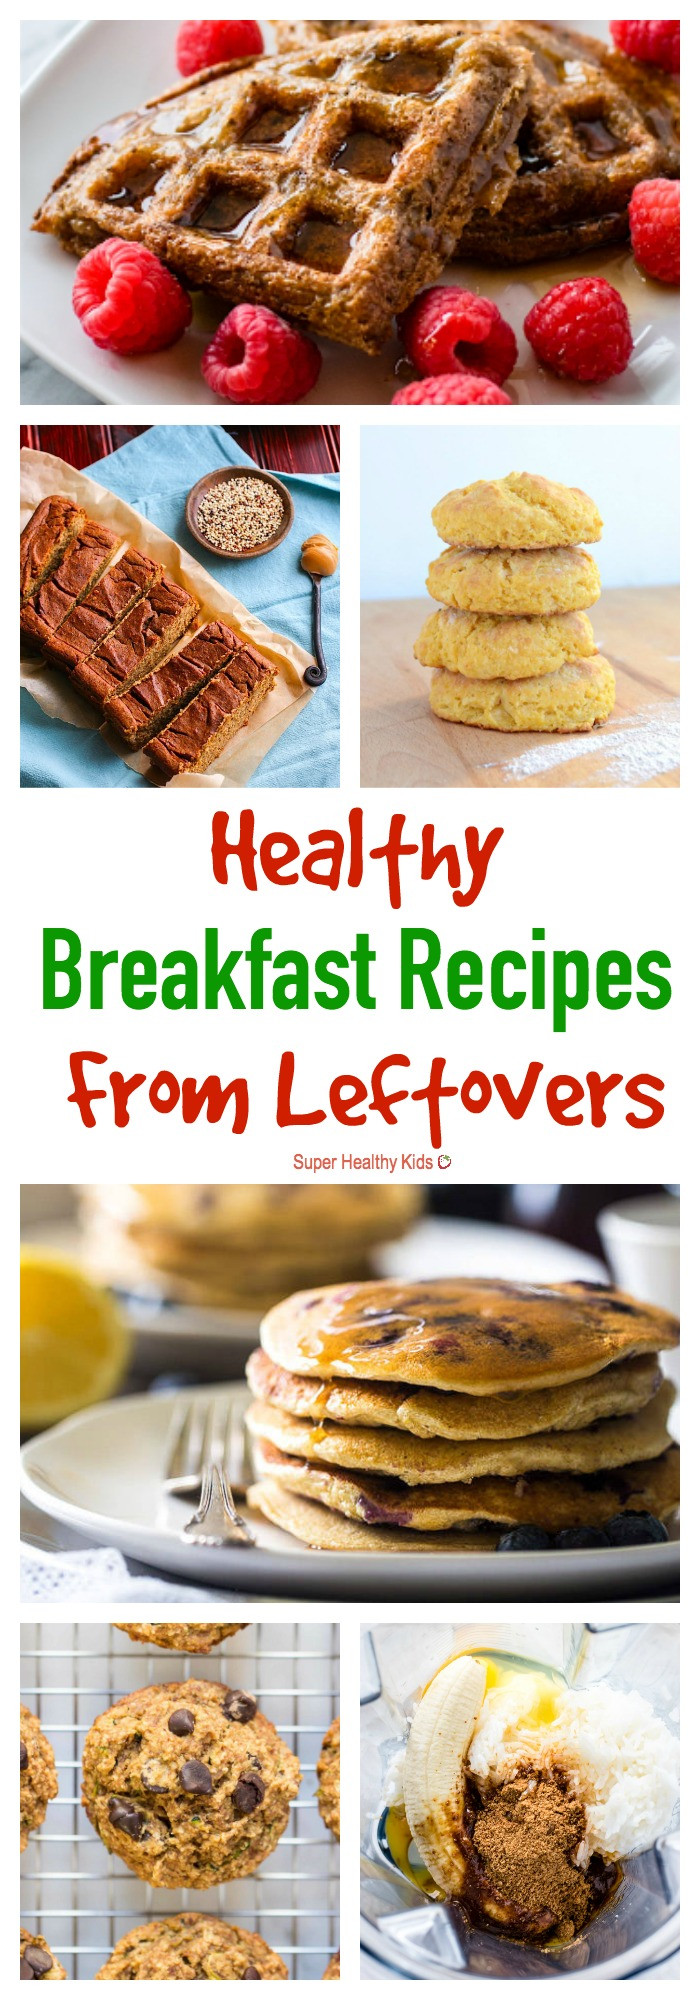 Healthy Breakfast To Make
 Healthy Breakfast Recipes You Can Make From Leftovers